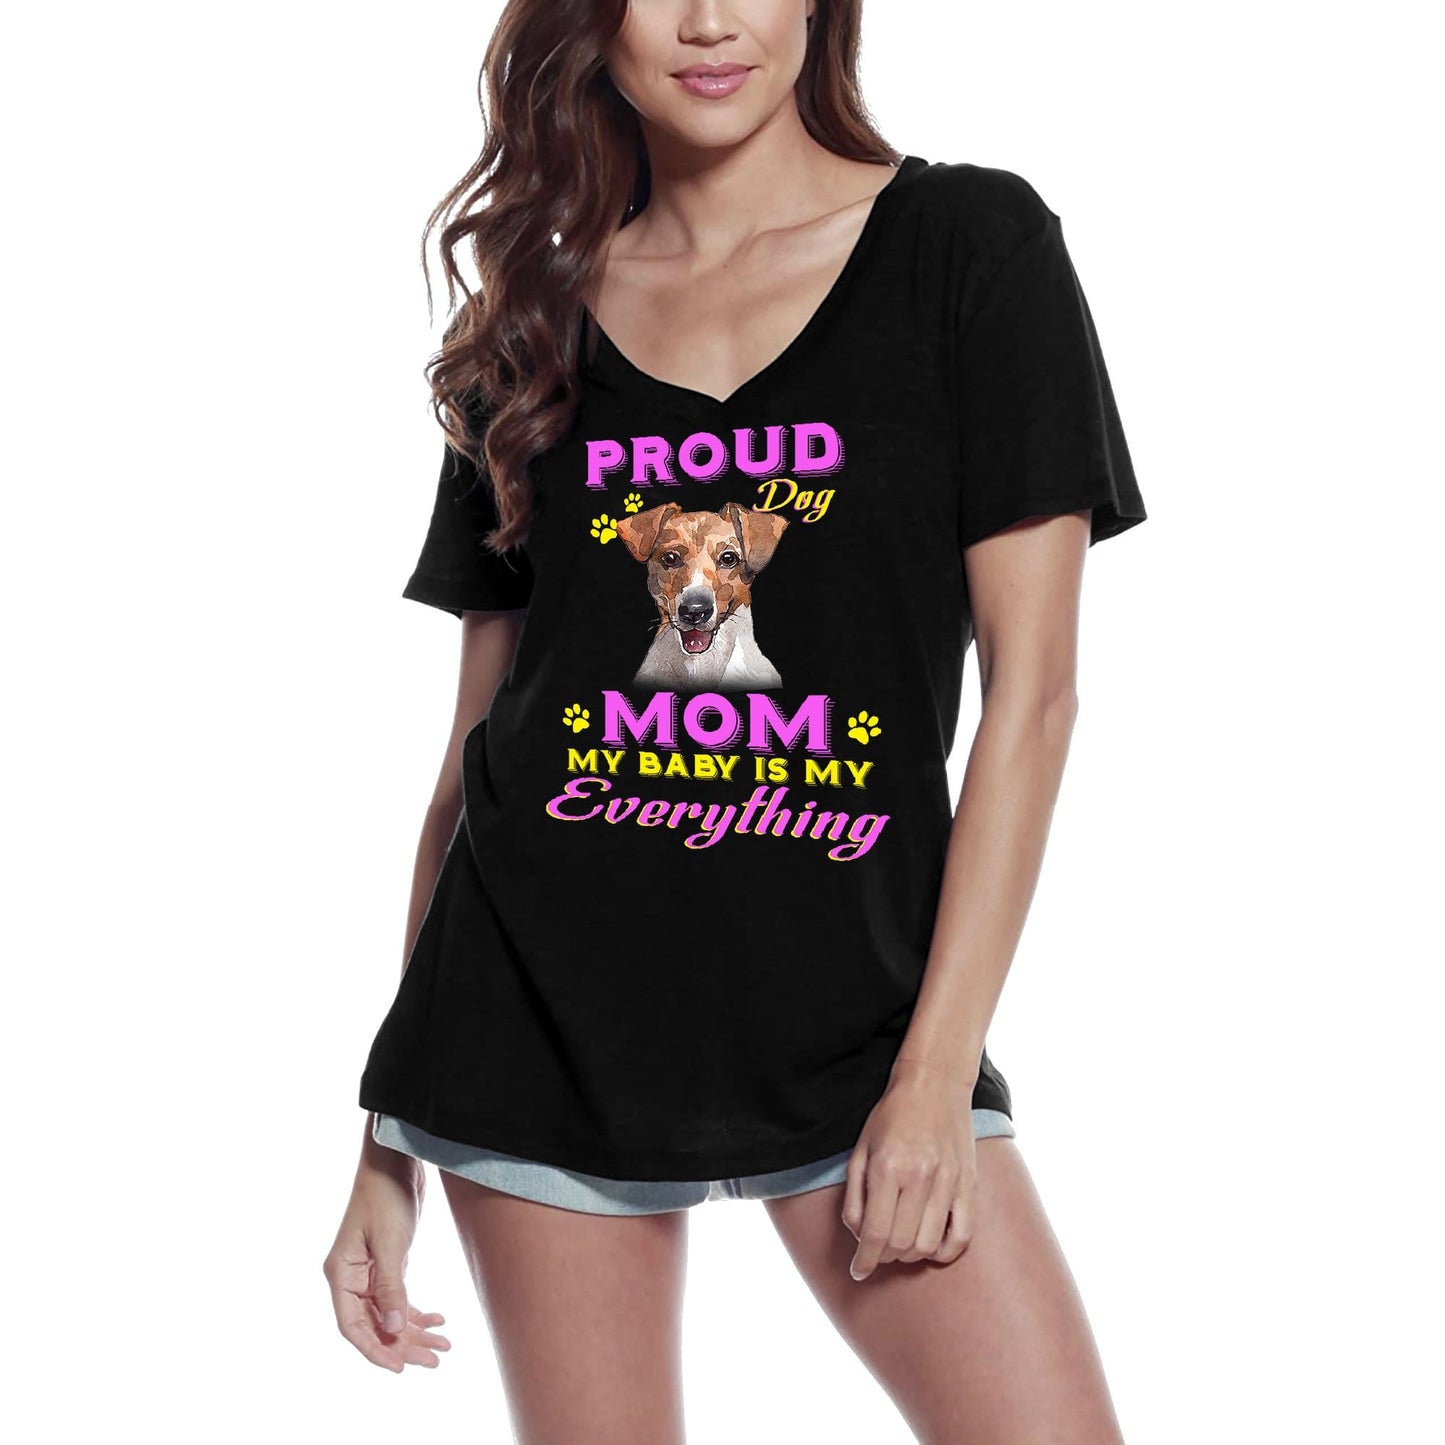 ULTRABASIC Women's T-Shirt Proud Day - Jack Russel Terrier Dog Mom - My Baby is My Everything